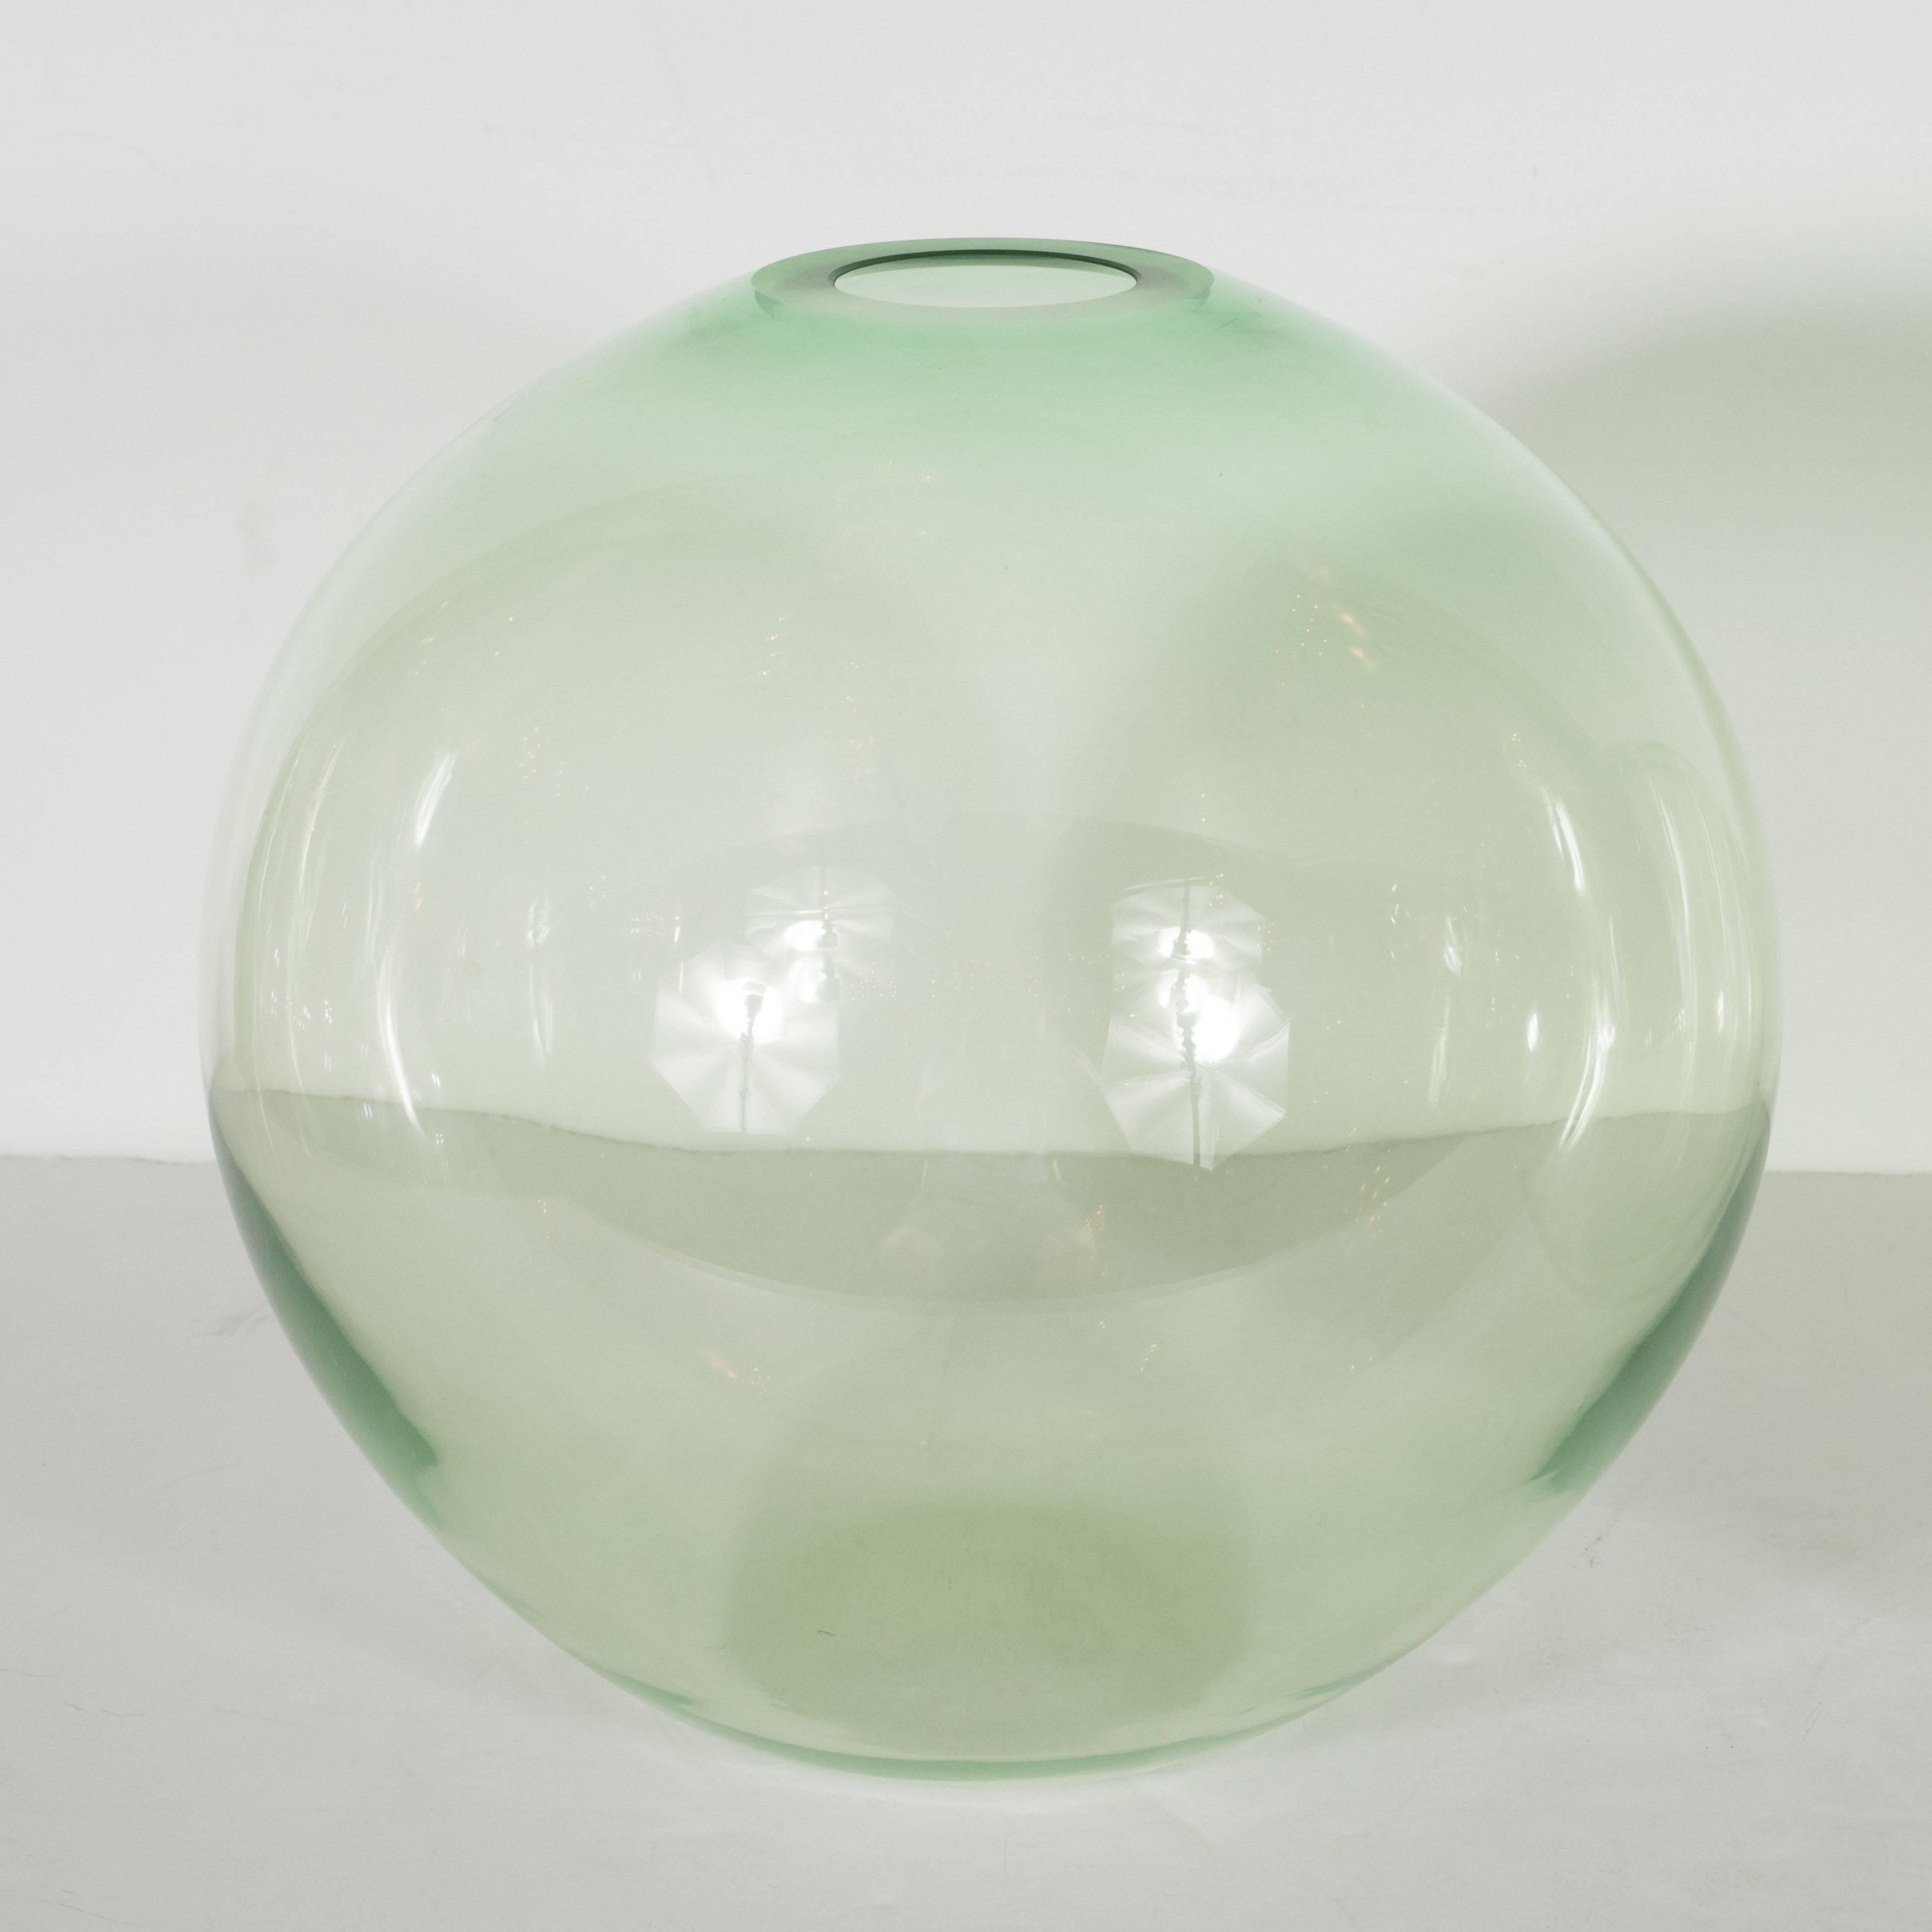 This pair of globular vases have been handblown by the esteemed Brooklyn based artist Nick Leonoff in an emerald hue of translucent glass. With their radiant palate and organic forms, they are perfect as functional vases for presenting flowers, and